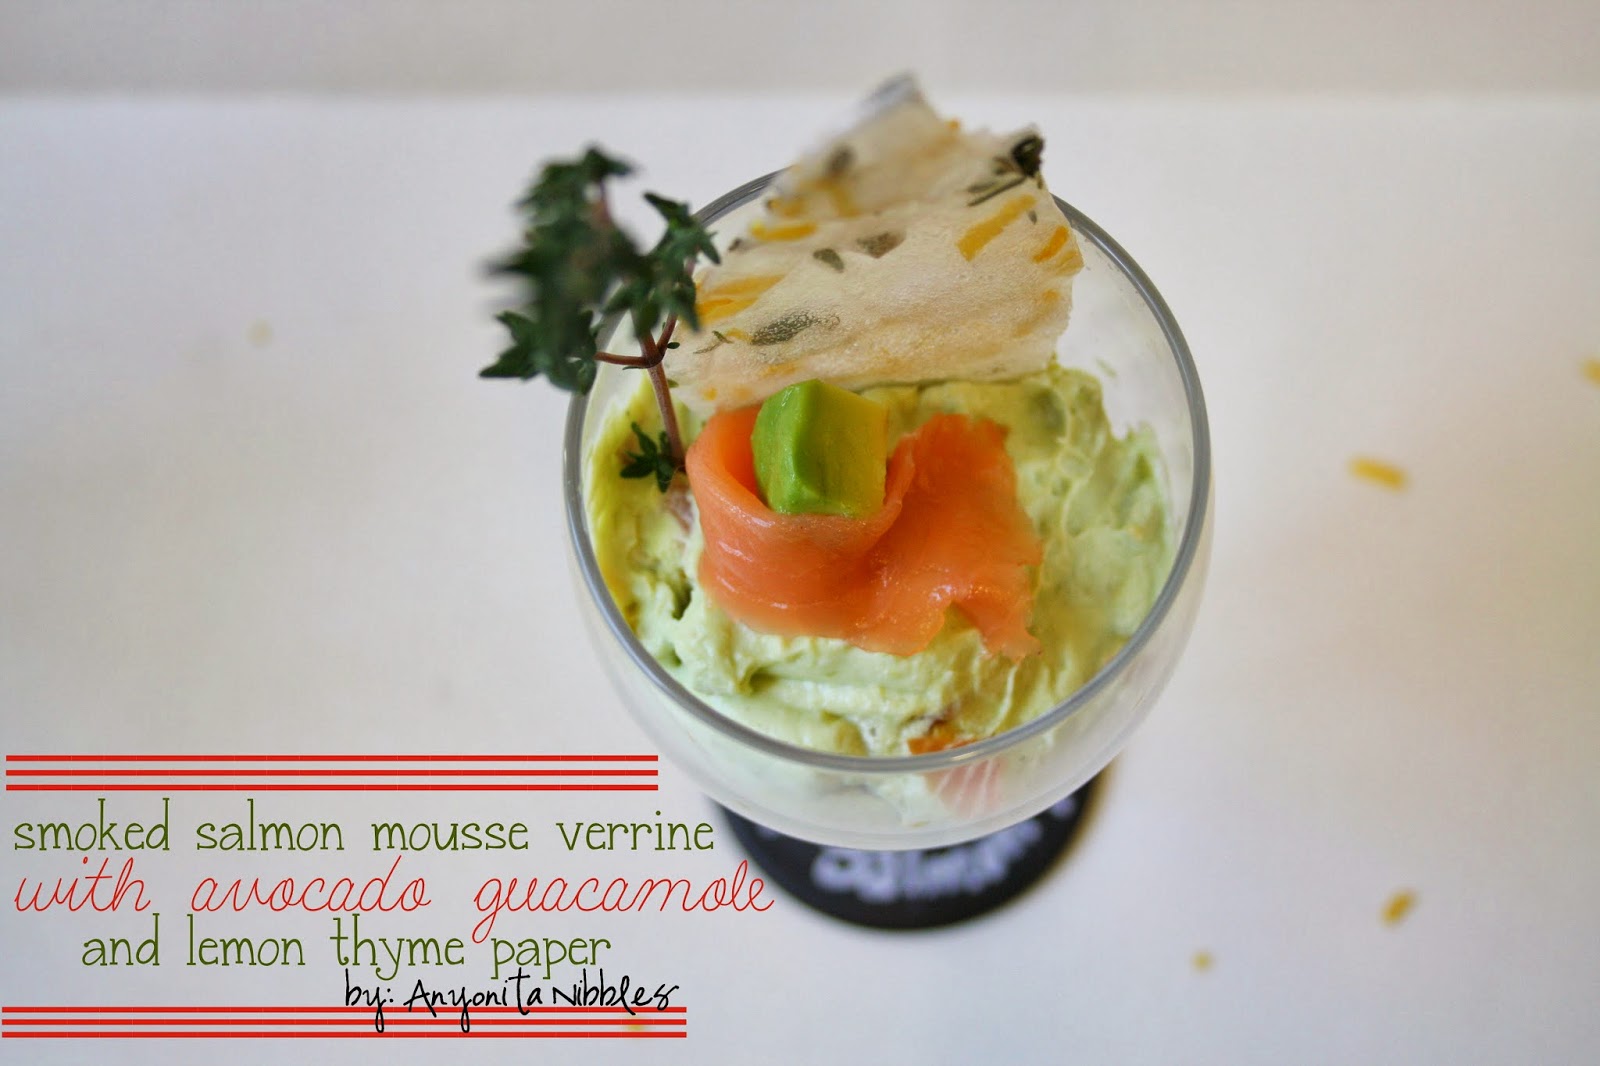 Smoked Salmon Mousse Verrine with Avocado Guacamole and Lemon Thyme Paper